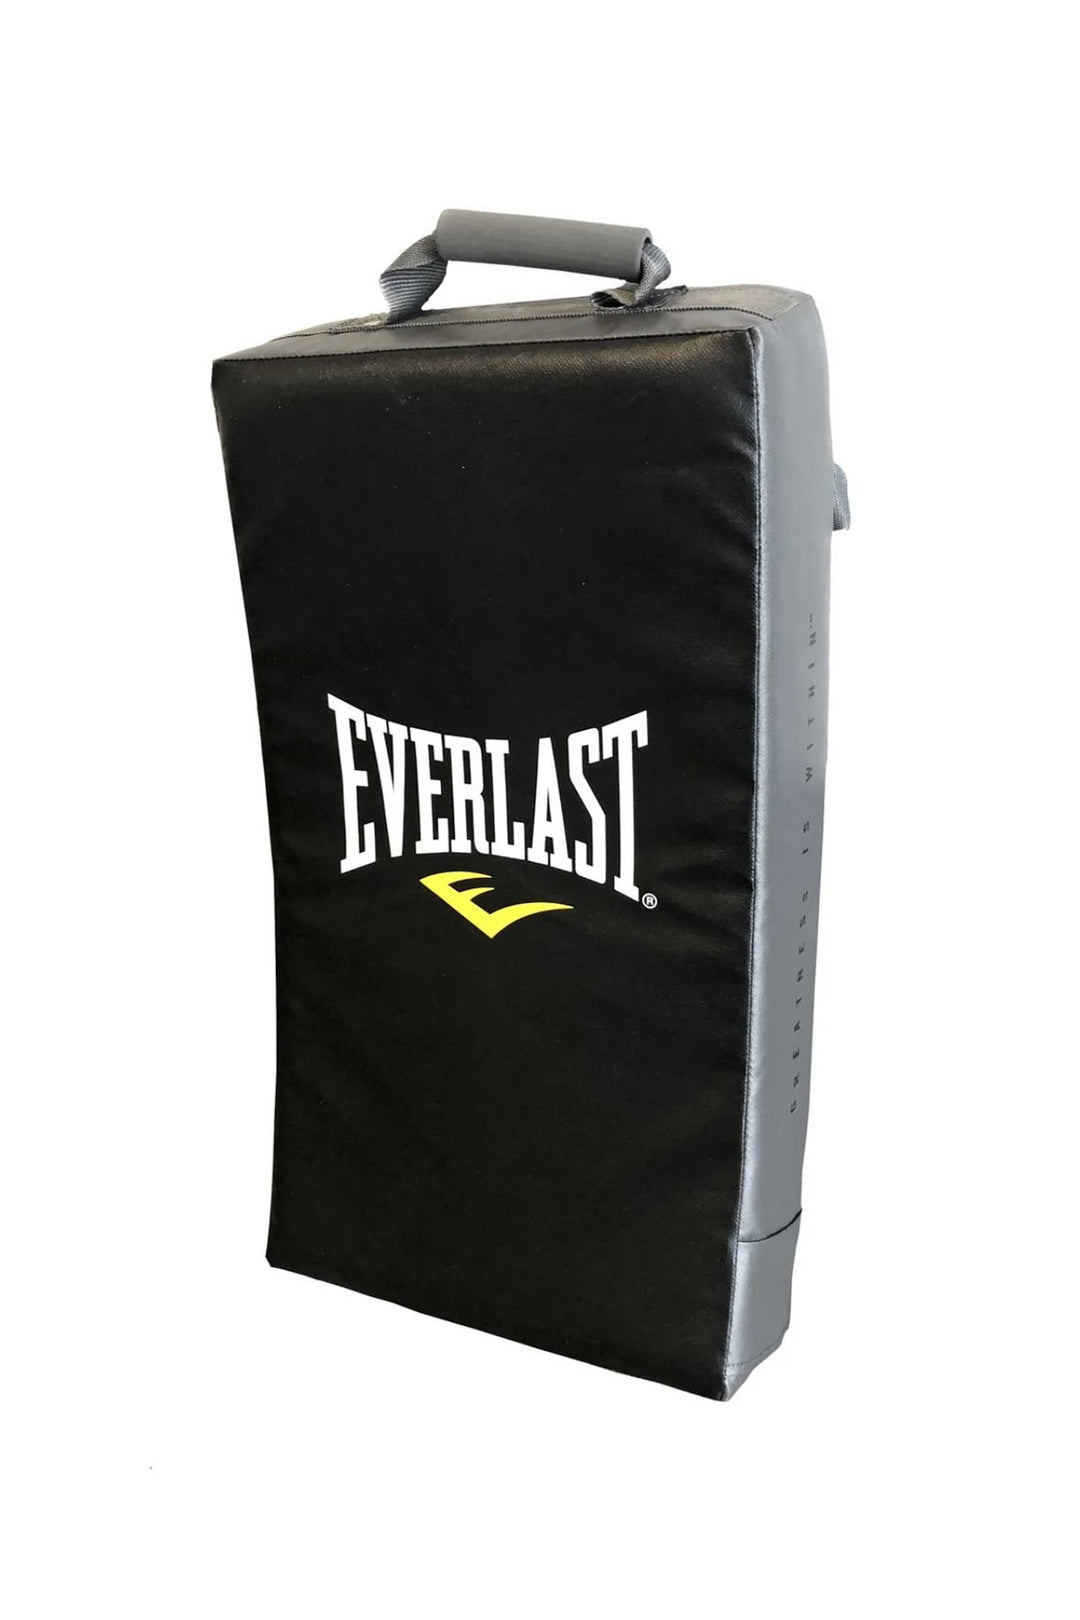 Everlast Pro Curved Punch and Kick Shield